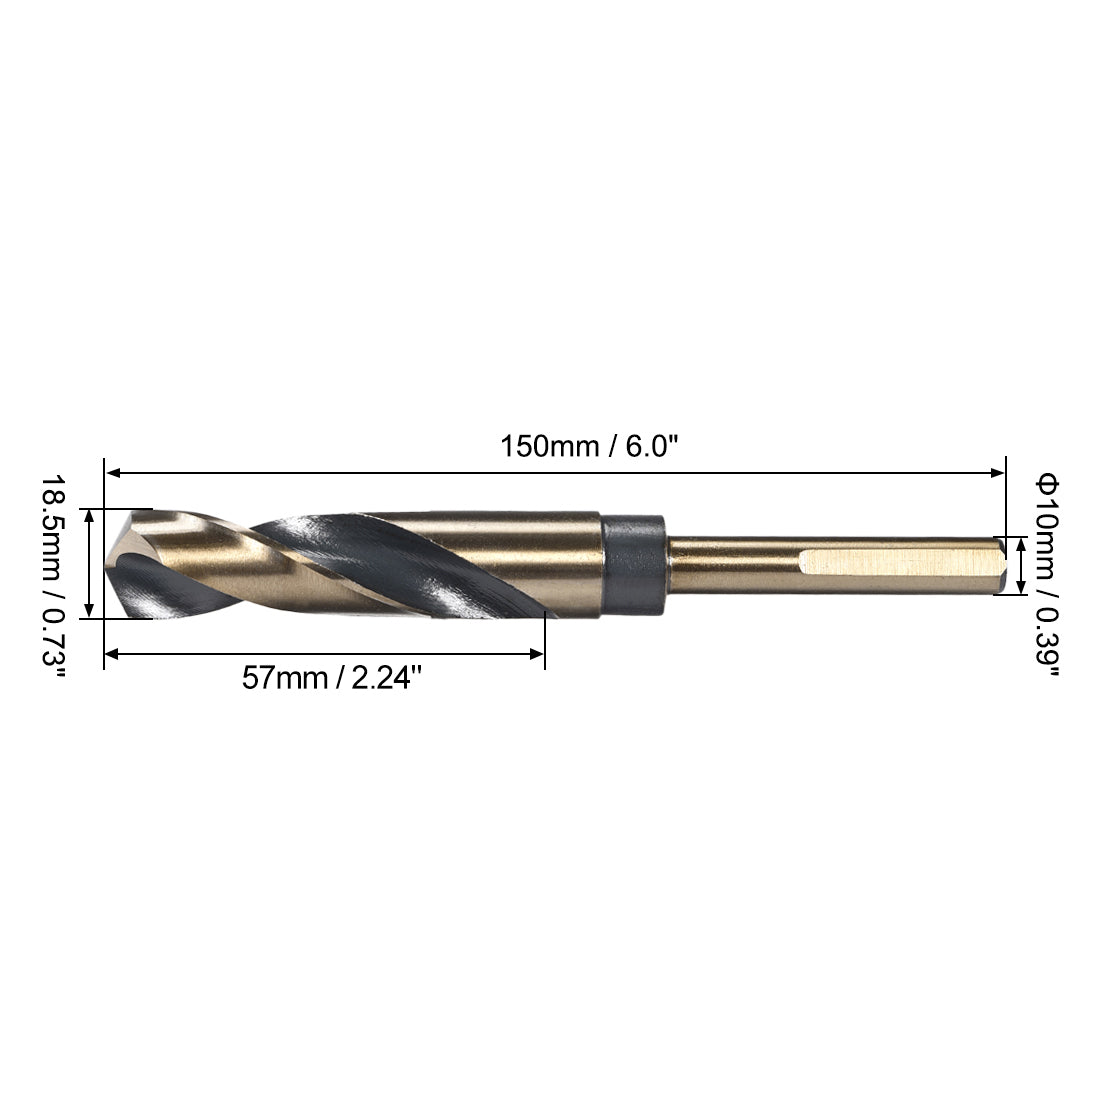 Uxcell Uxcell Reduced Shank Twist Drill Bits 18.5mm HSS 4341 with 10mm Shank 1 Pcs